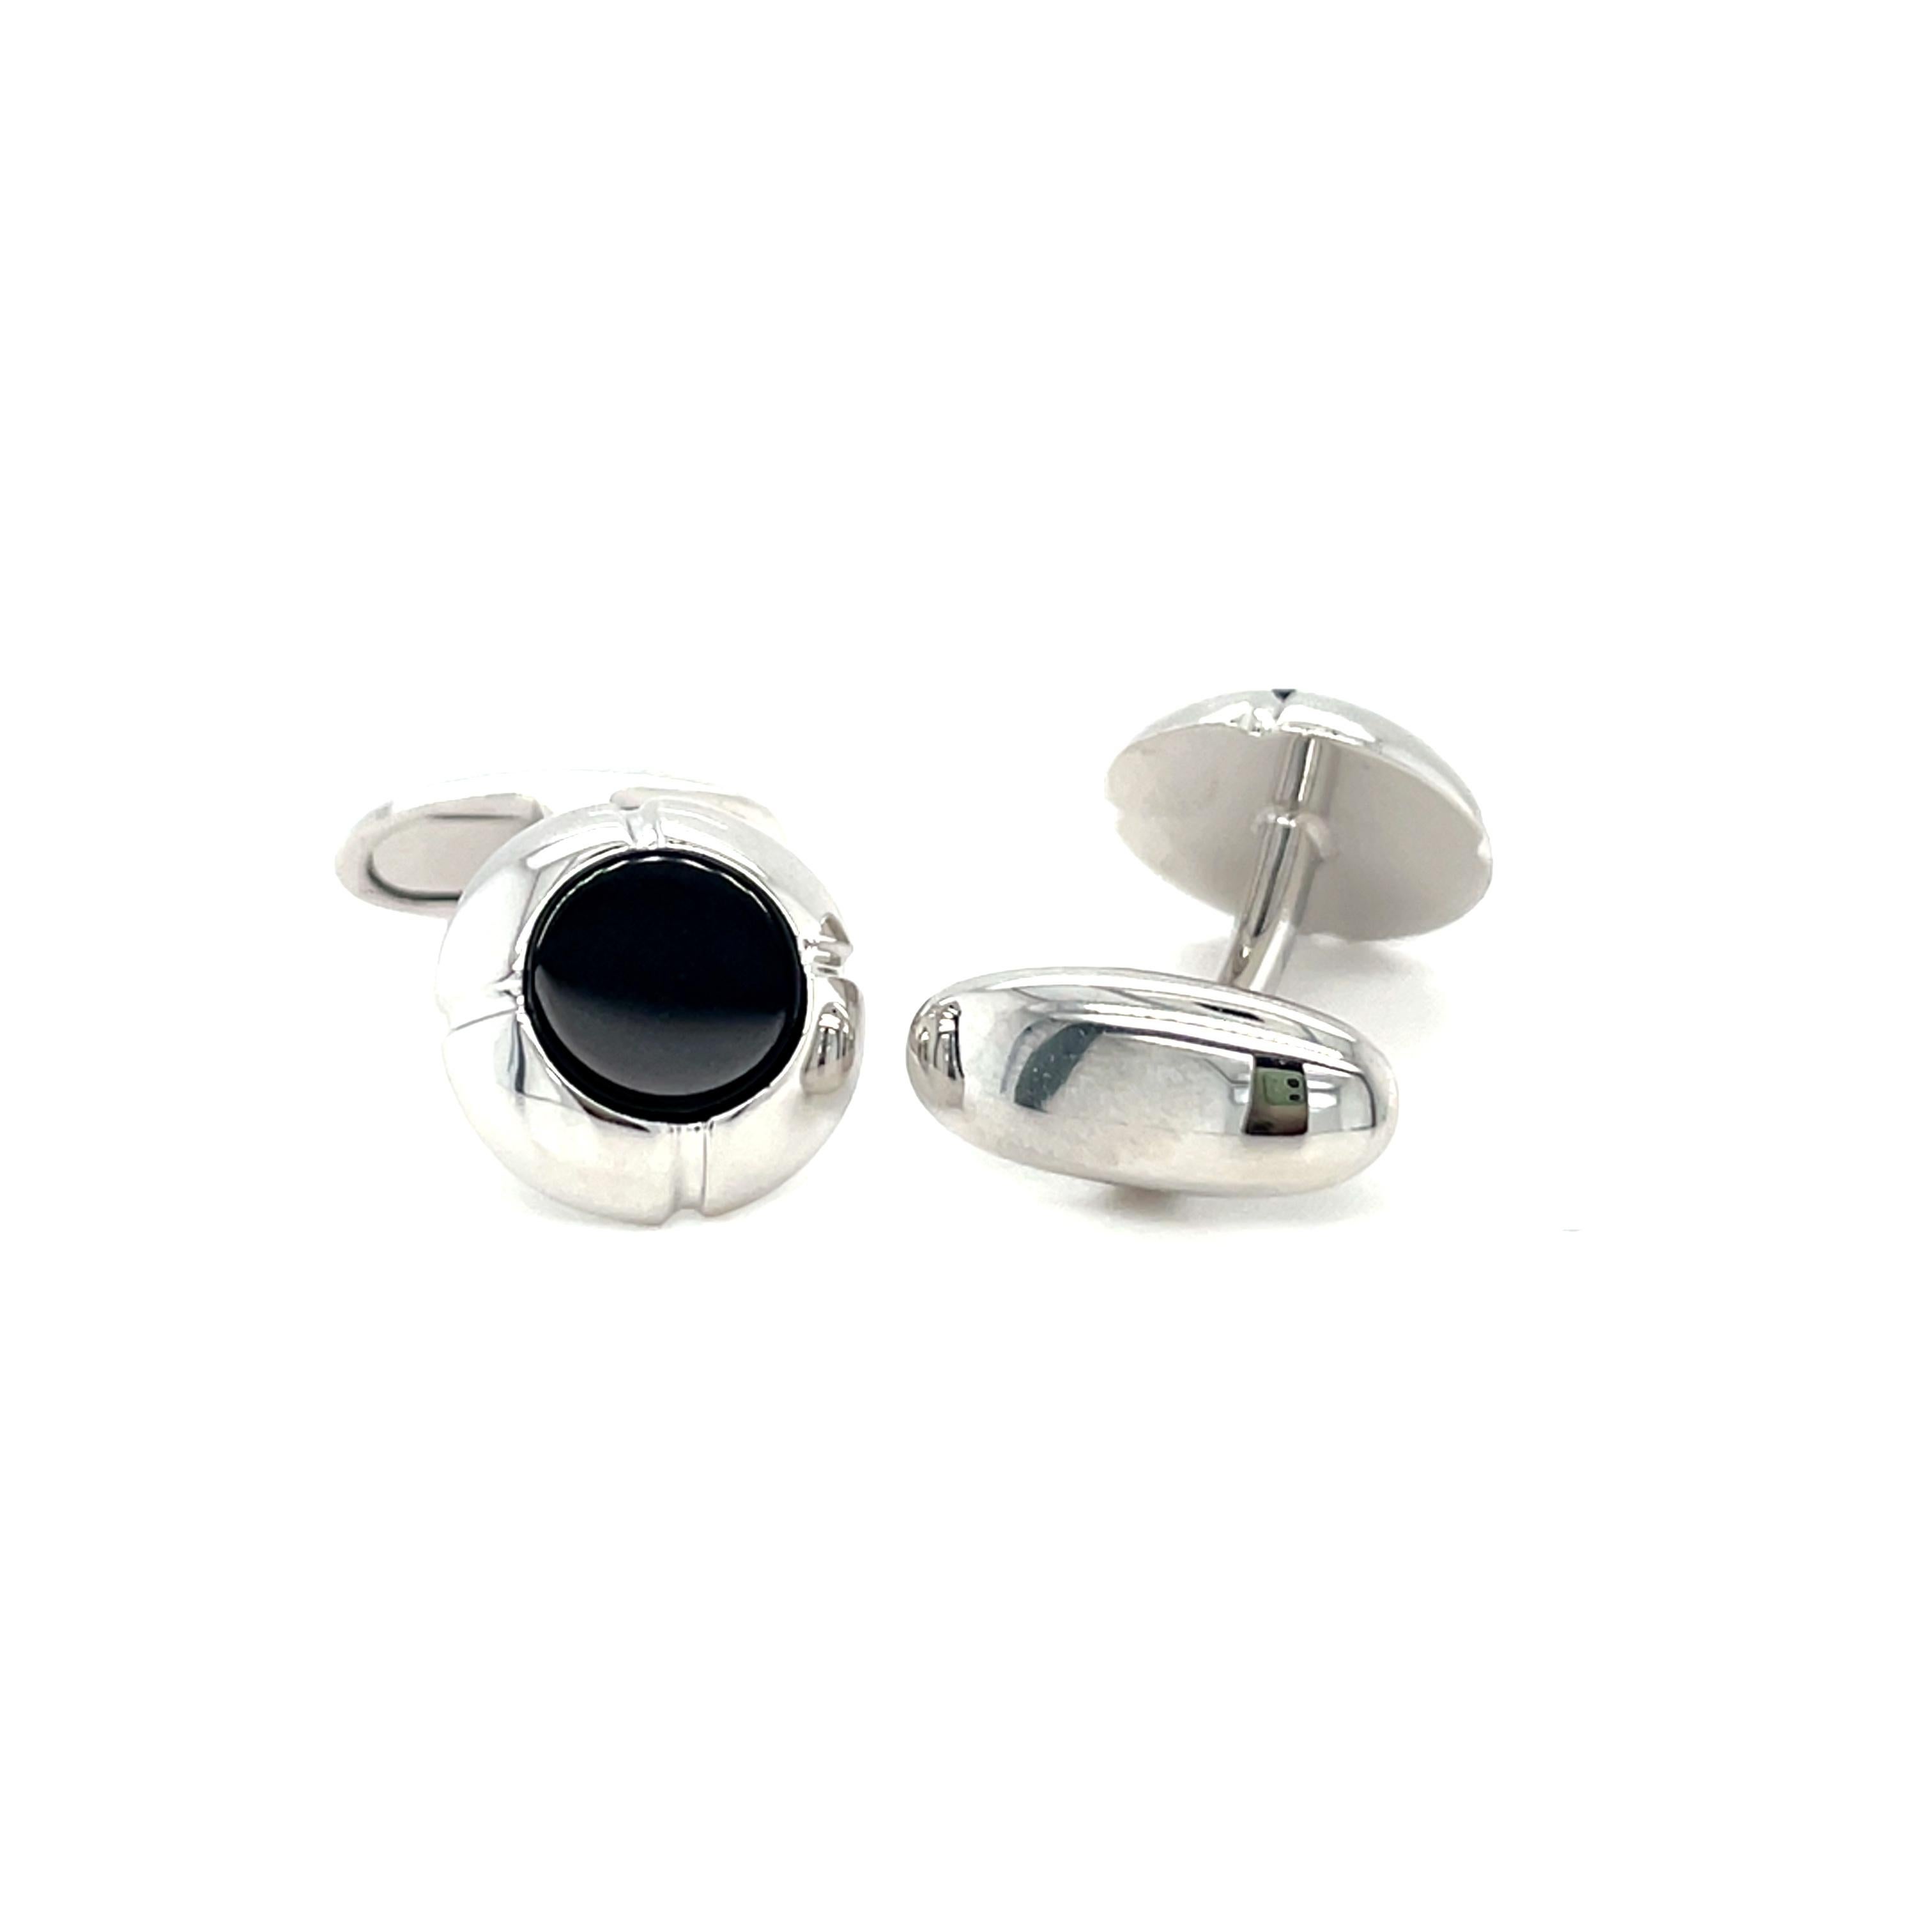 These white gold cufflinks are from Men's Collection. These cufflinks are decorated with onyx. The total amount of it is 2 Carat. The dimensions of the cufflinks are 1.3Cm. These cufflinks are a perfect upgrade to every special occasion.
This